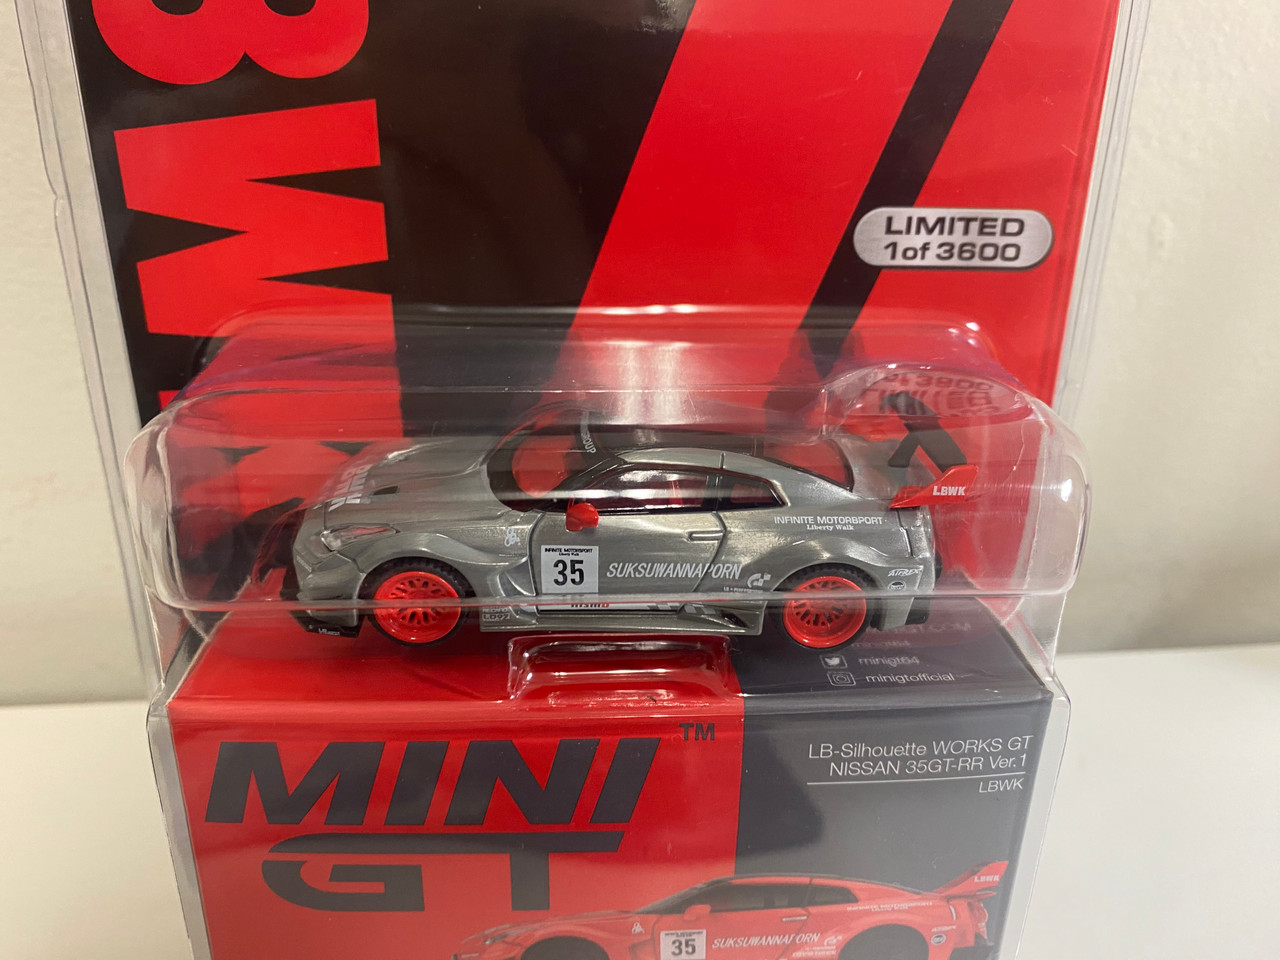 CHASE CAR 1/64 Mini GT Nissan 35GT-RR Ver.1 LB-Silhouette Works GT LBWK RHD  (Right Hand Drive) #35 Chrome Silver with Black Top and Graphics Limited